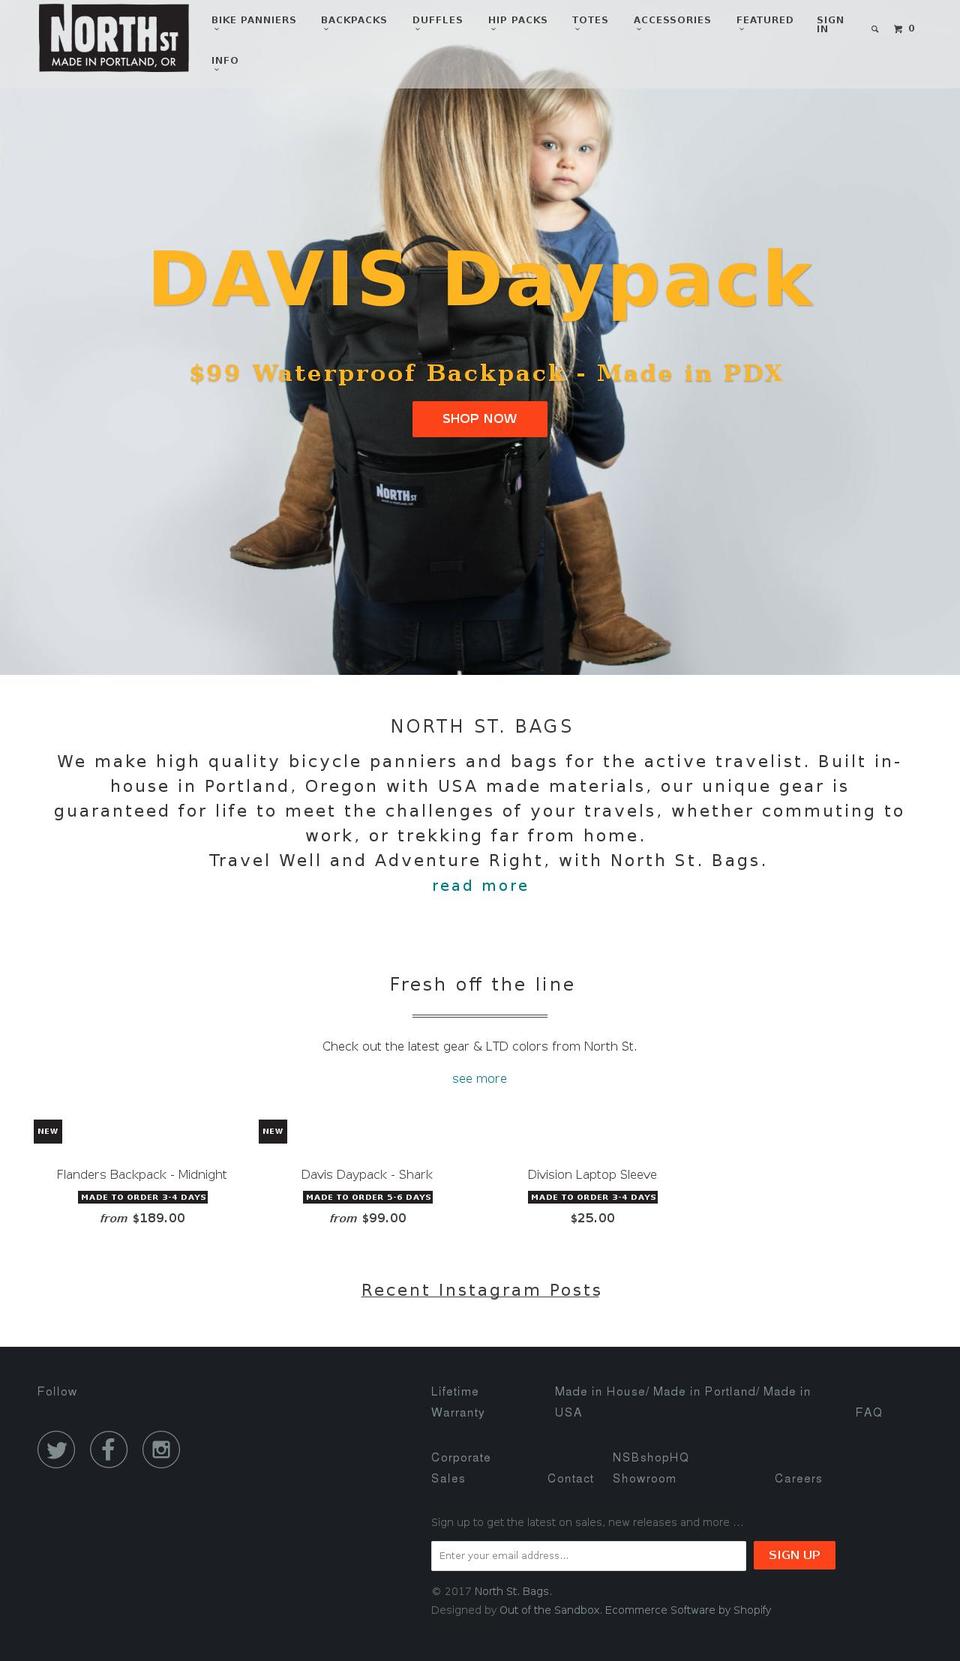 Parallax Shopify theme site example northstbags.com